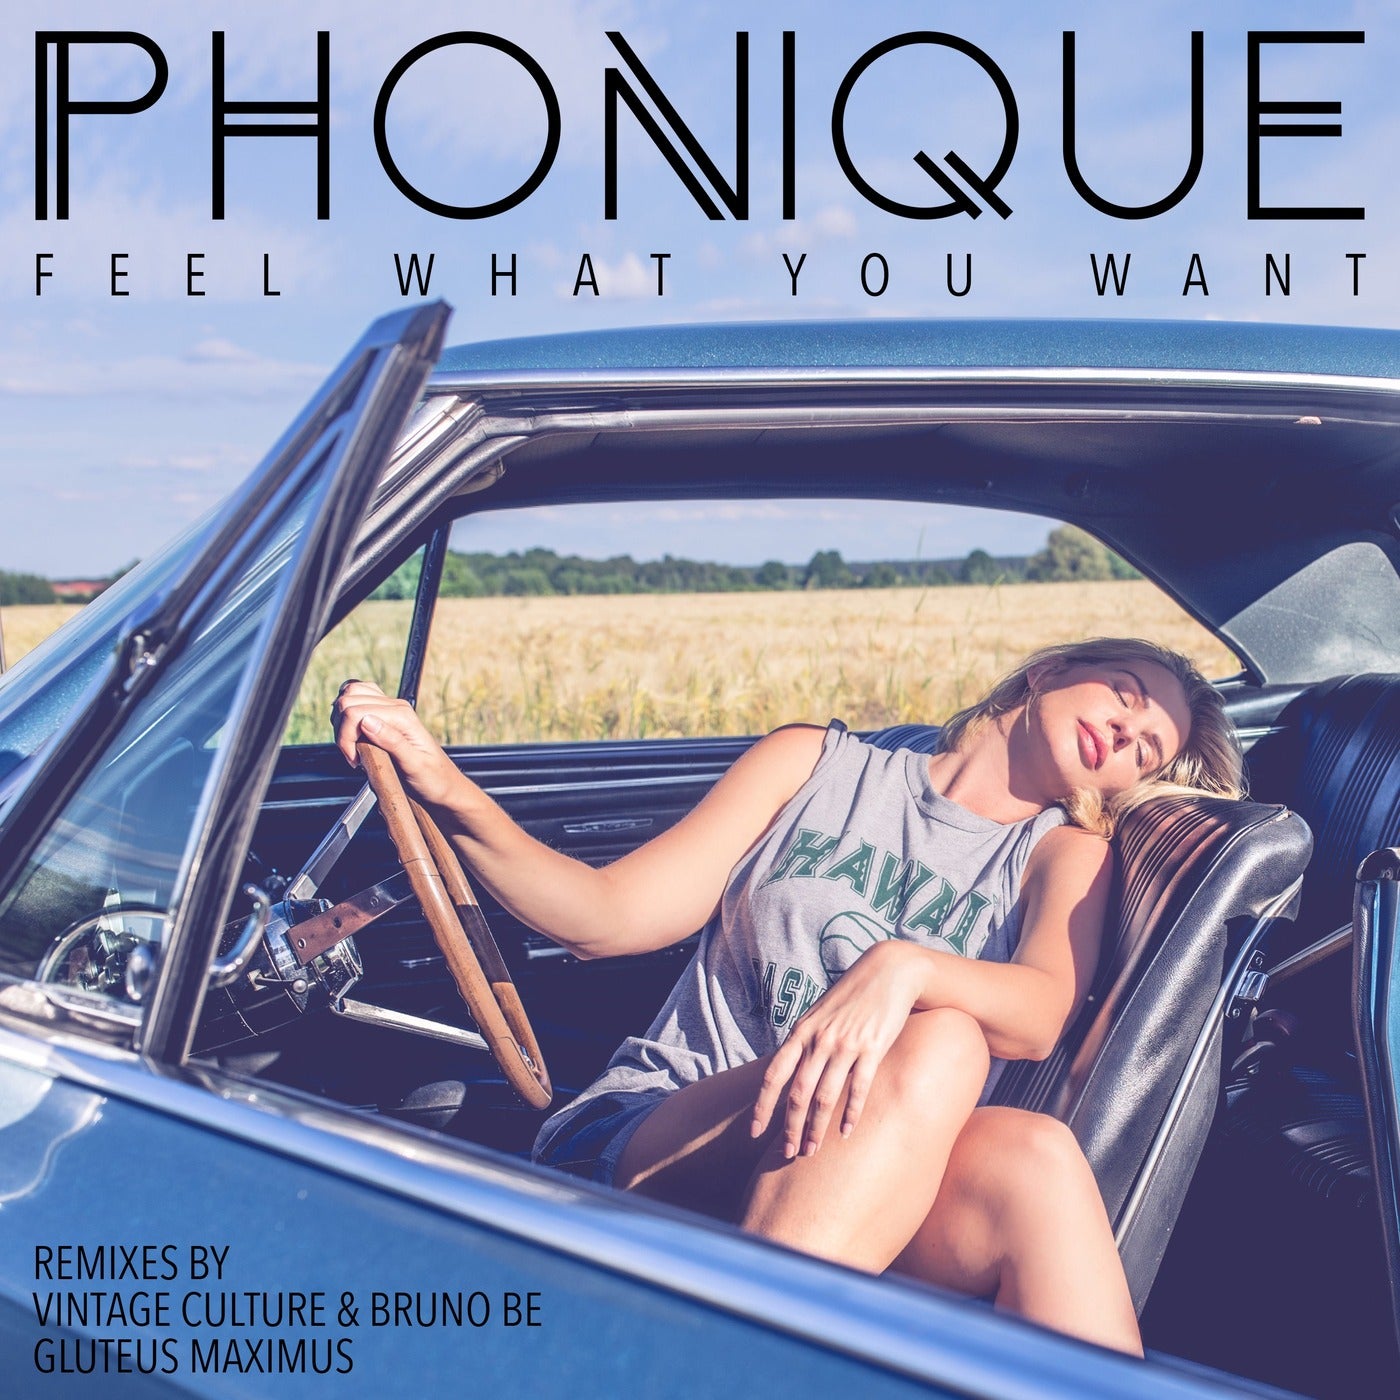 Feel What You Want (Vintage Culture & Bruno Be and Gluteus Maximus Remixes)